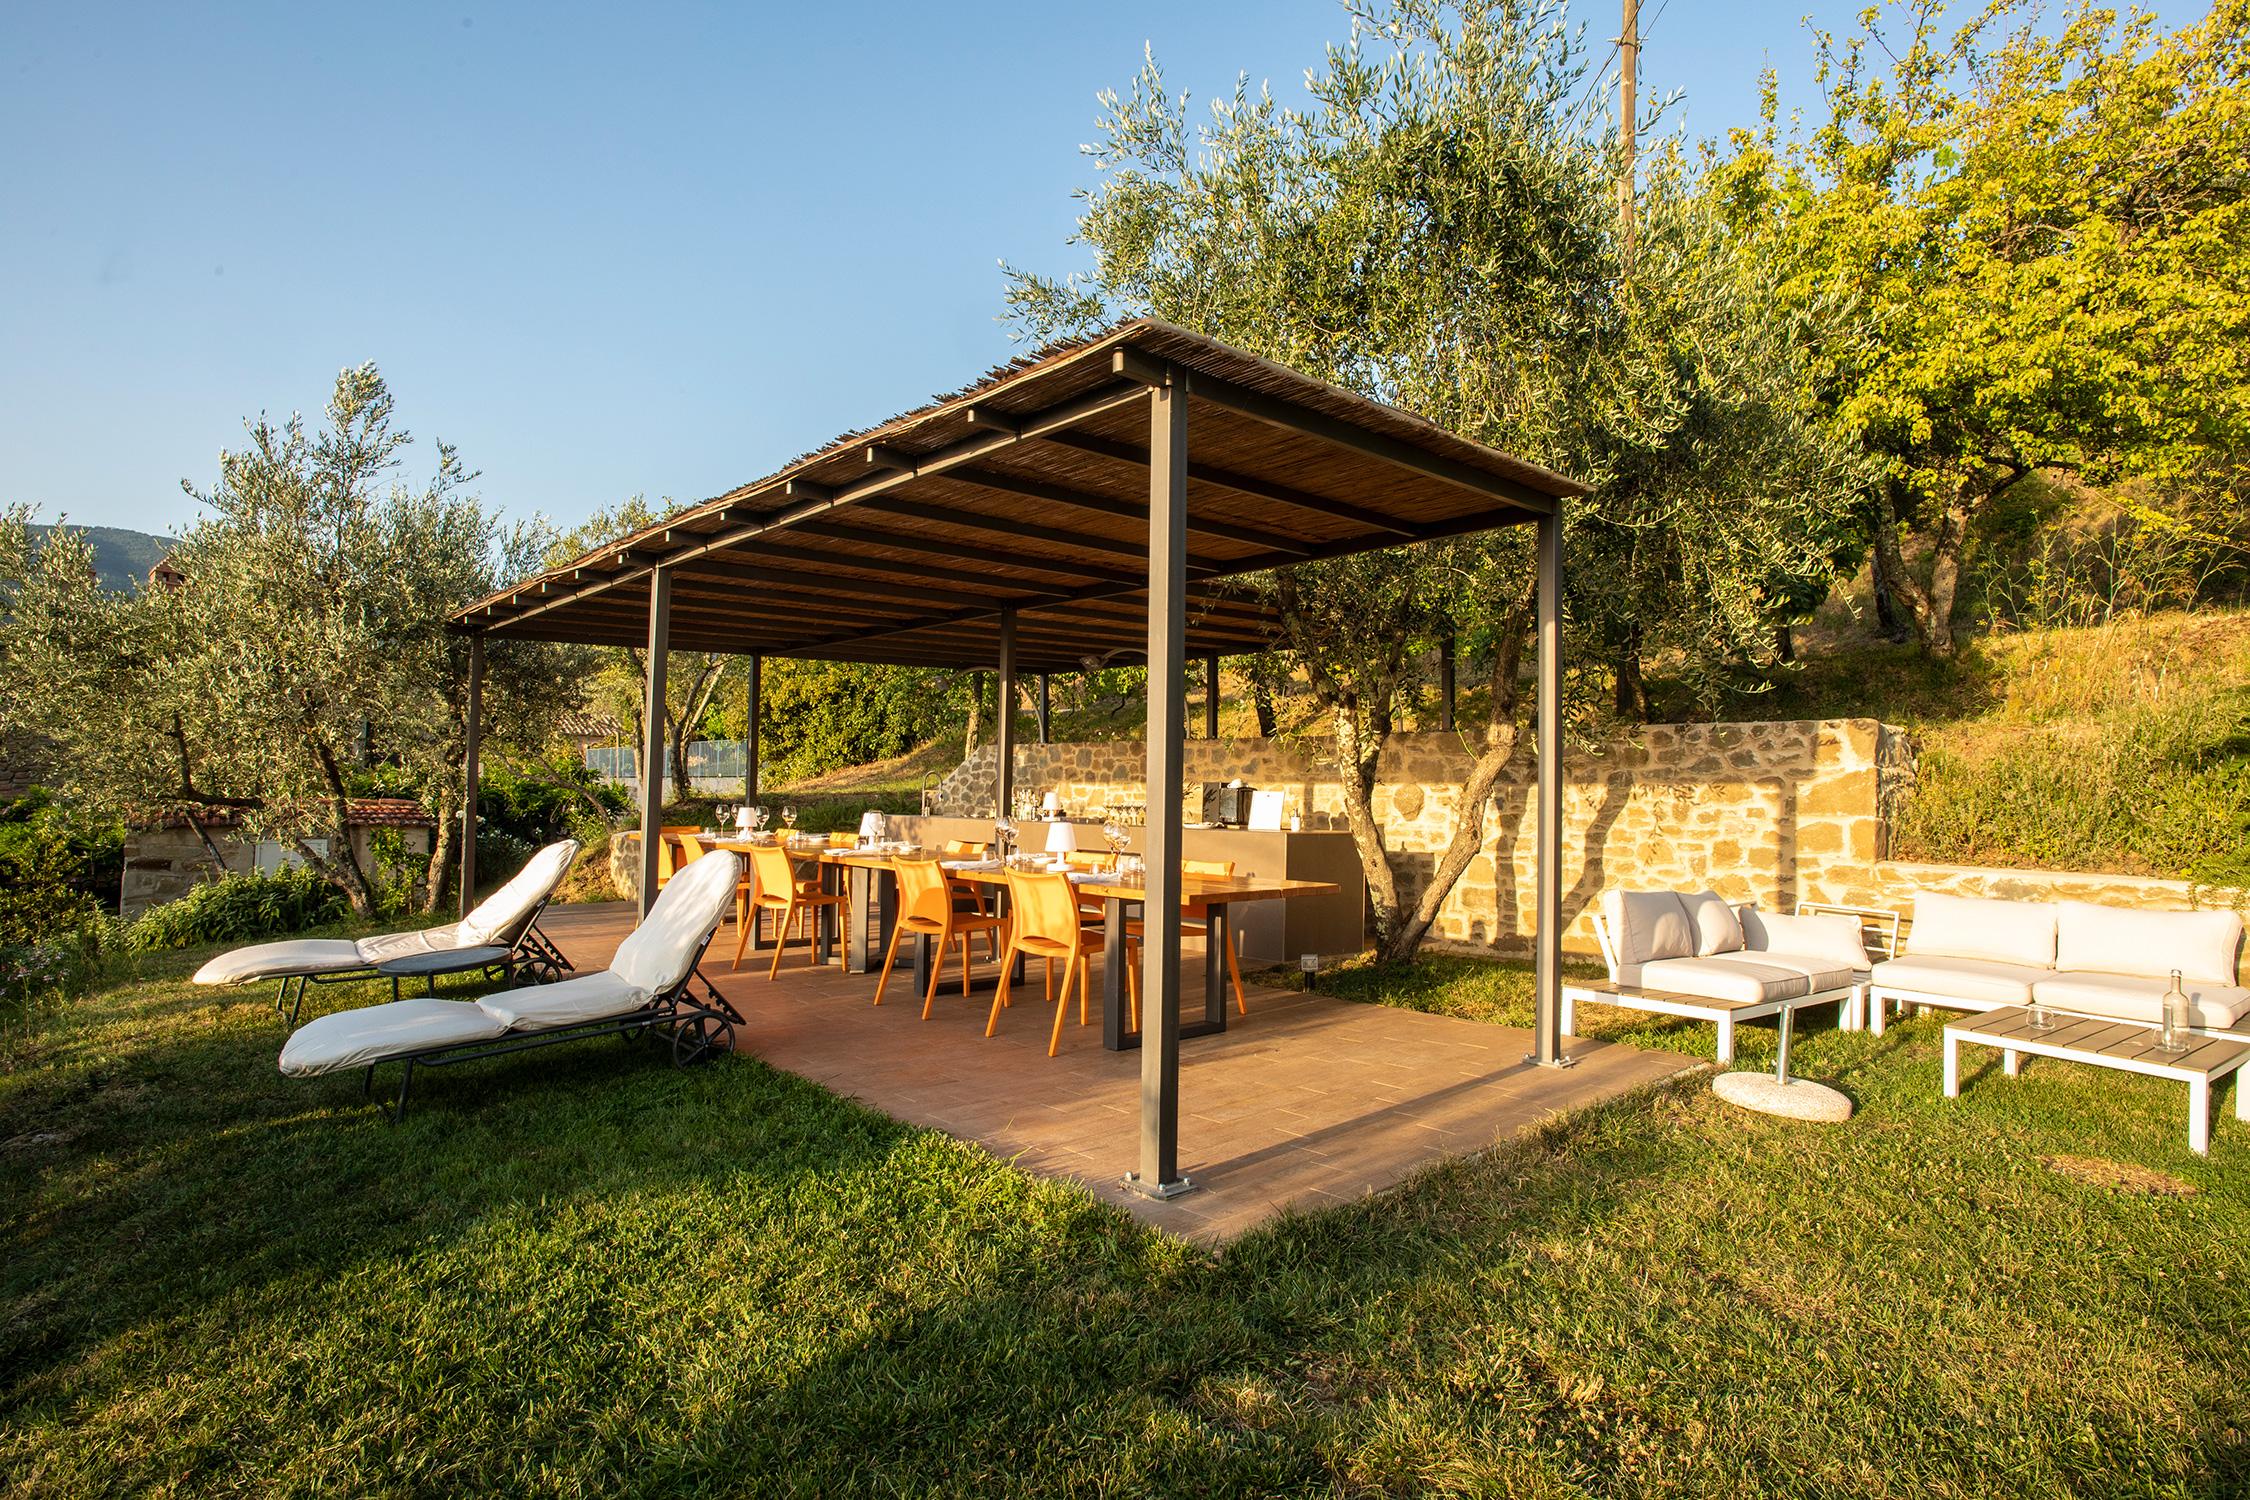 Organika | Restaurant with panoramic views and outdoor spaces in Corton, Tuscany